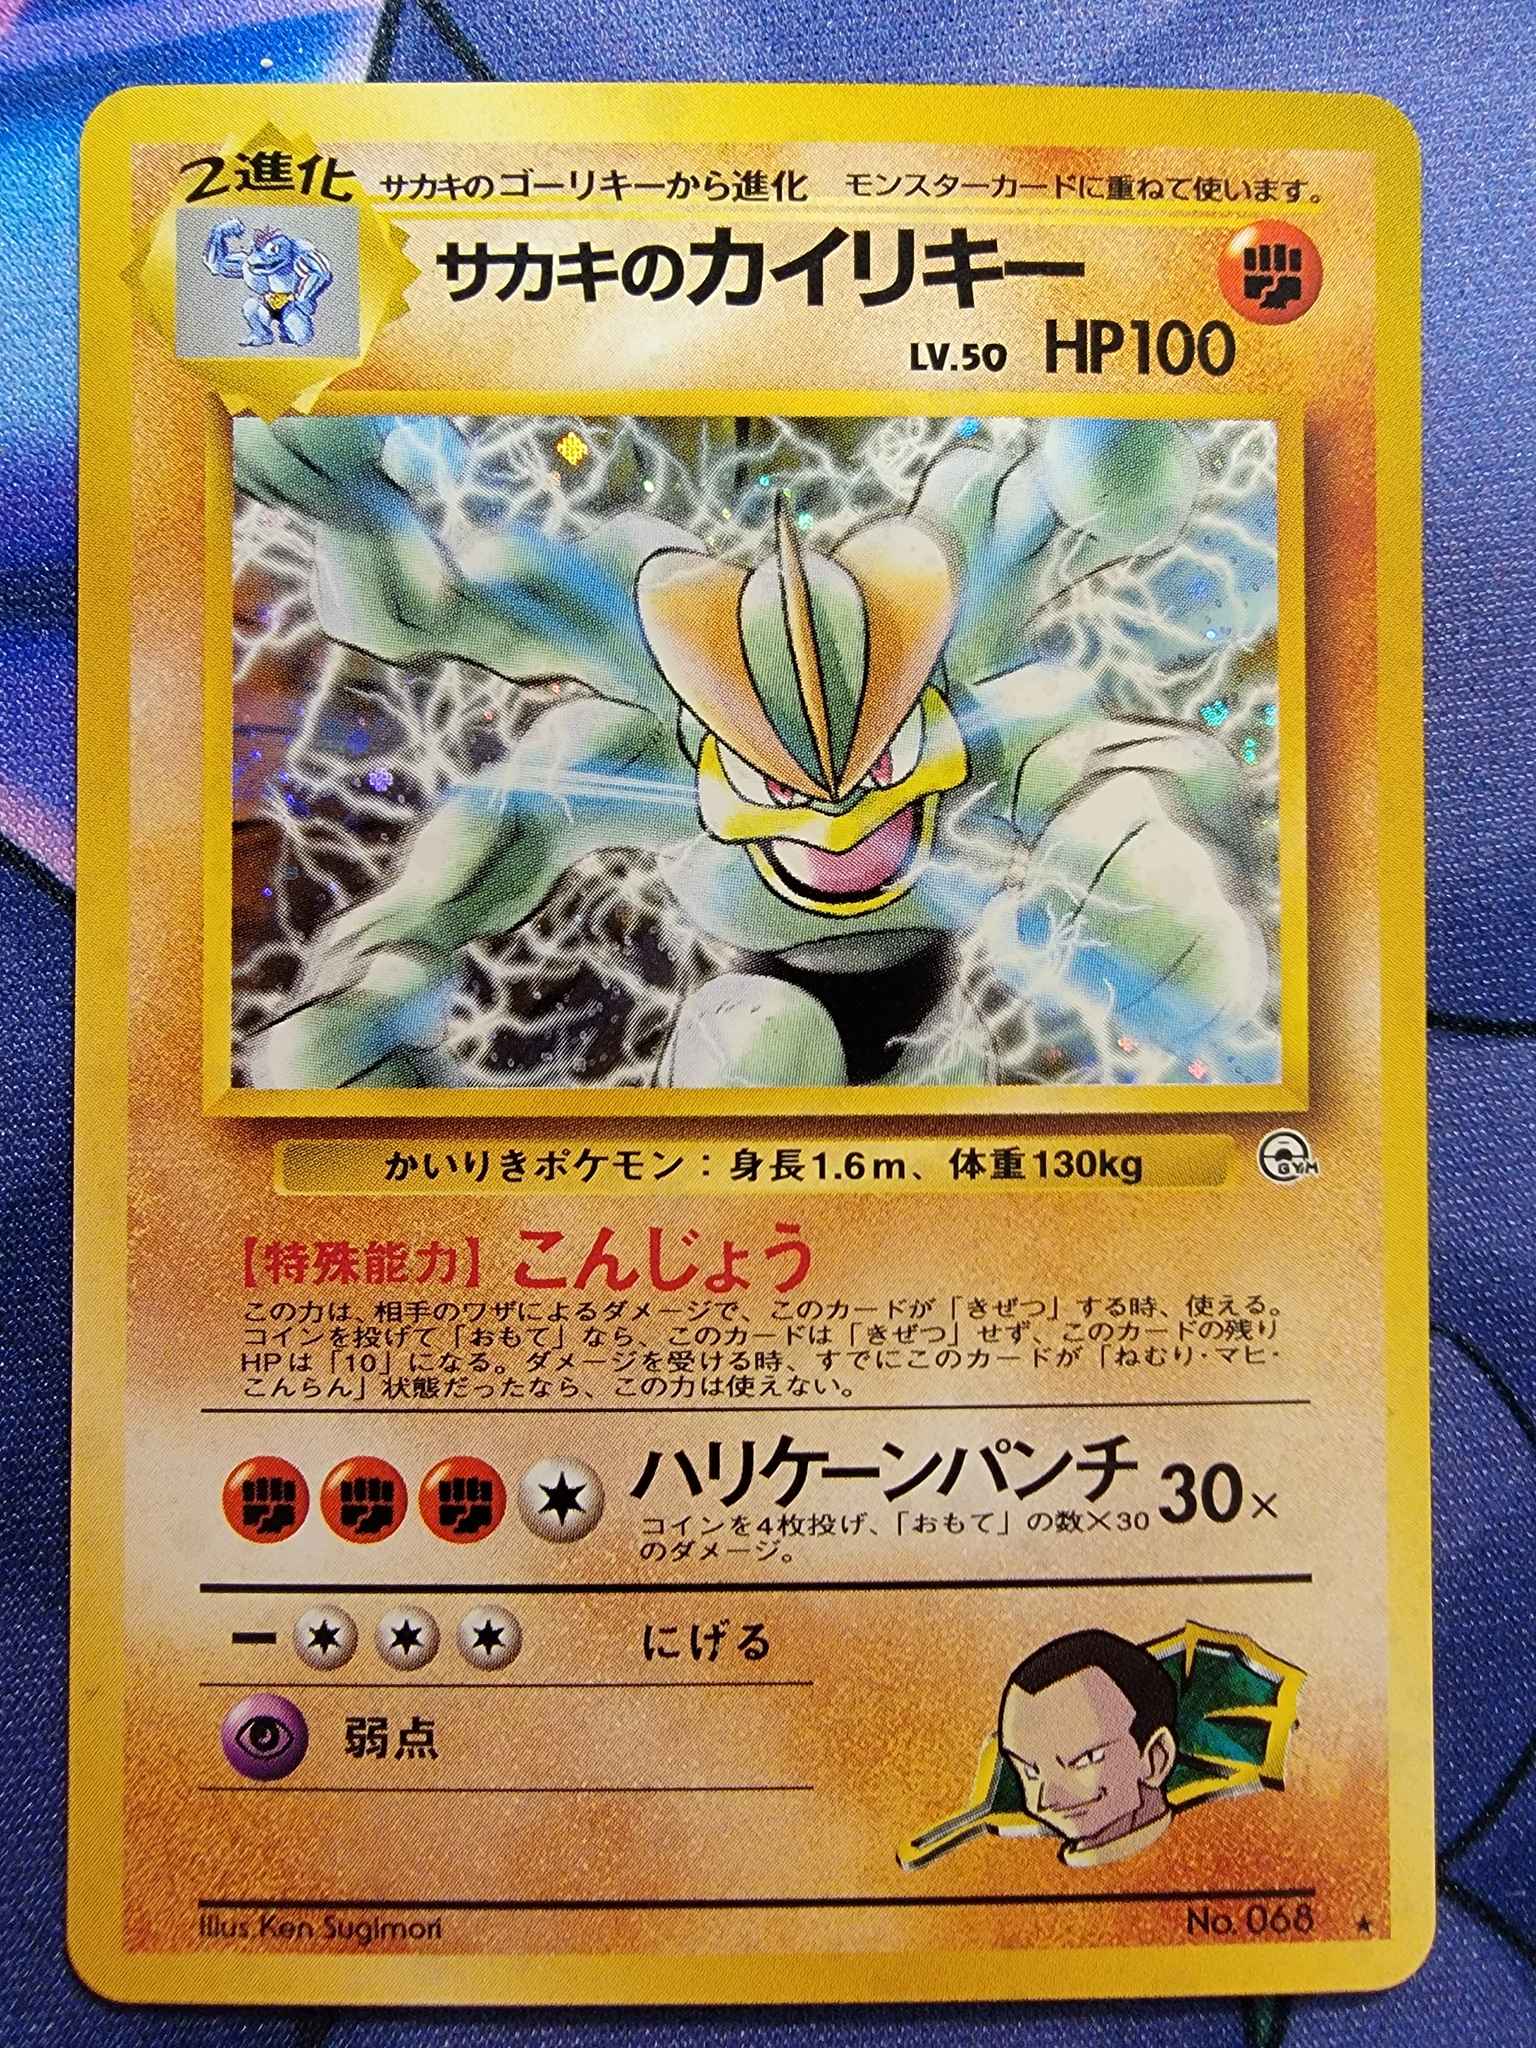 Japanese Giovanni S Machamp Giovanni S Machamp Gym Challenge Pokemon Online Gaming Store For Cards Miniatures Singles Packs Booster Boxes